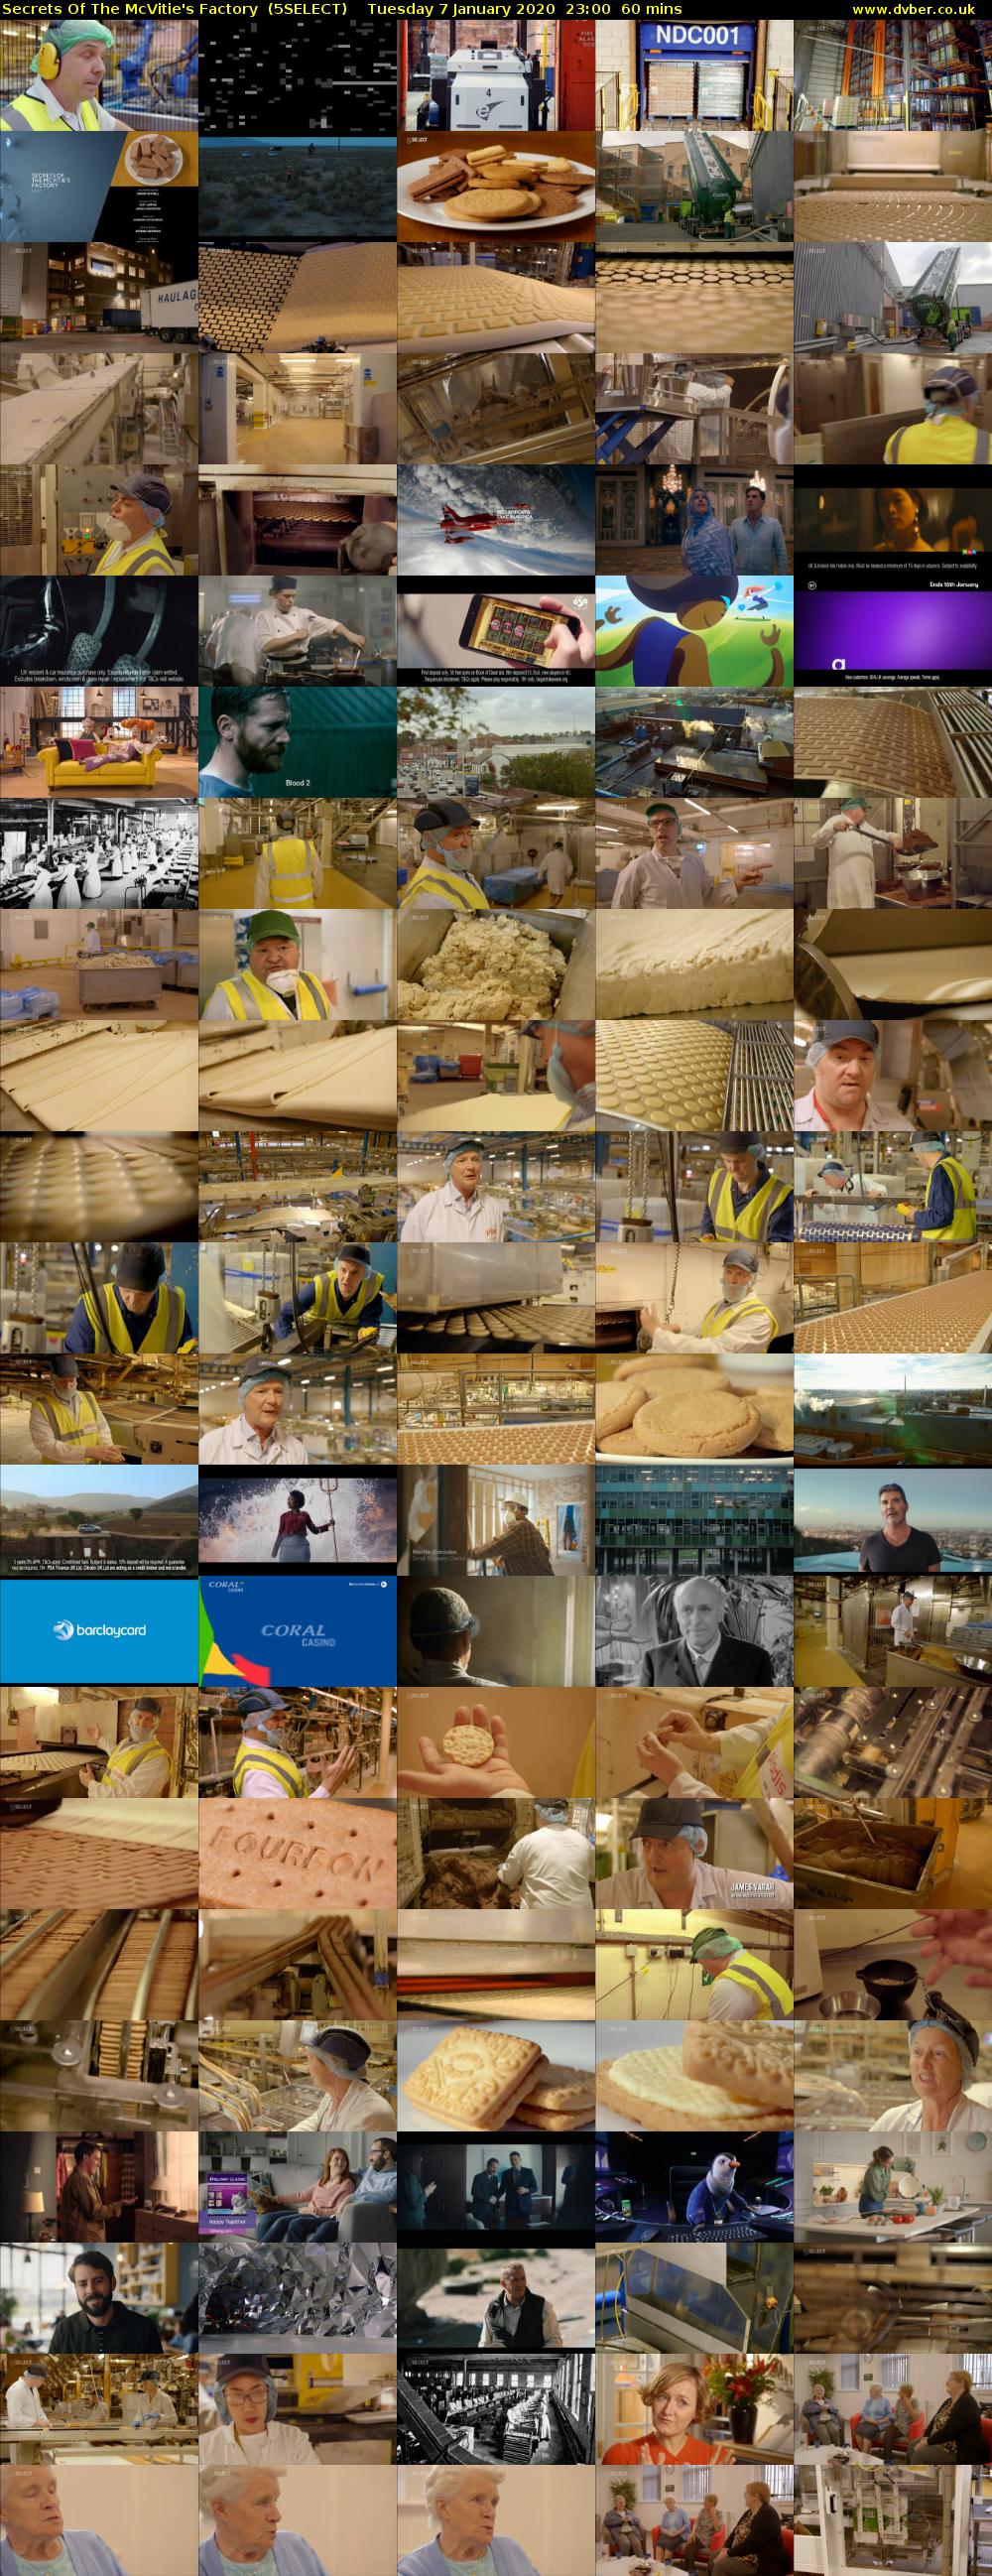 Secrets Of The McVitie's Factory  (5SELECT) Tuesday 7 January 2020 23:00 - 00:00